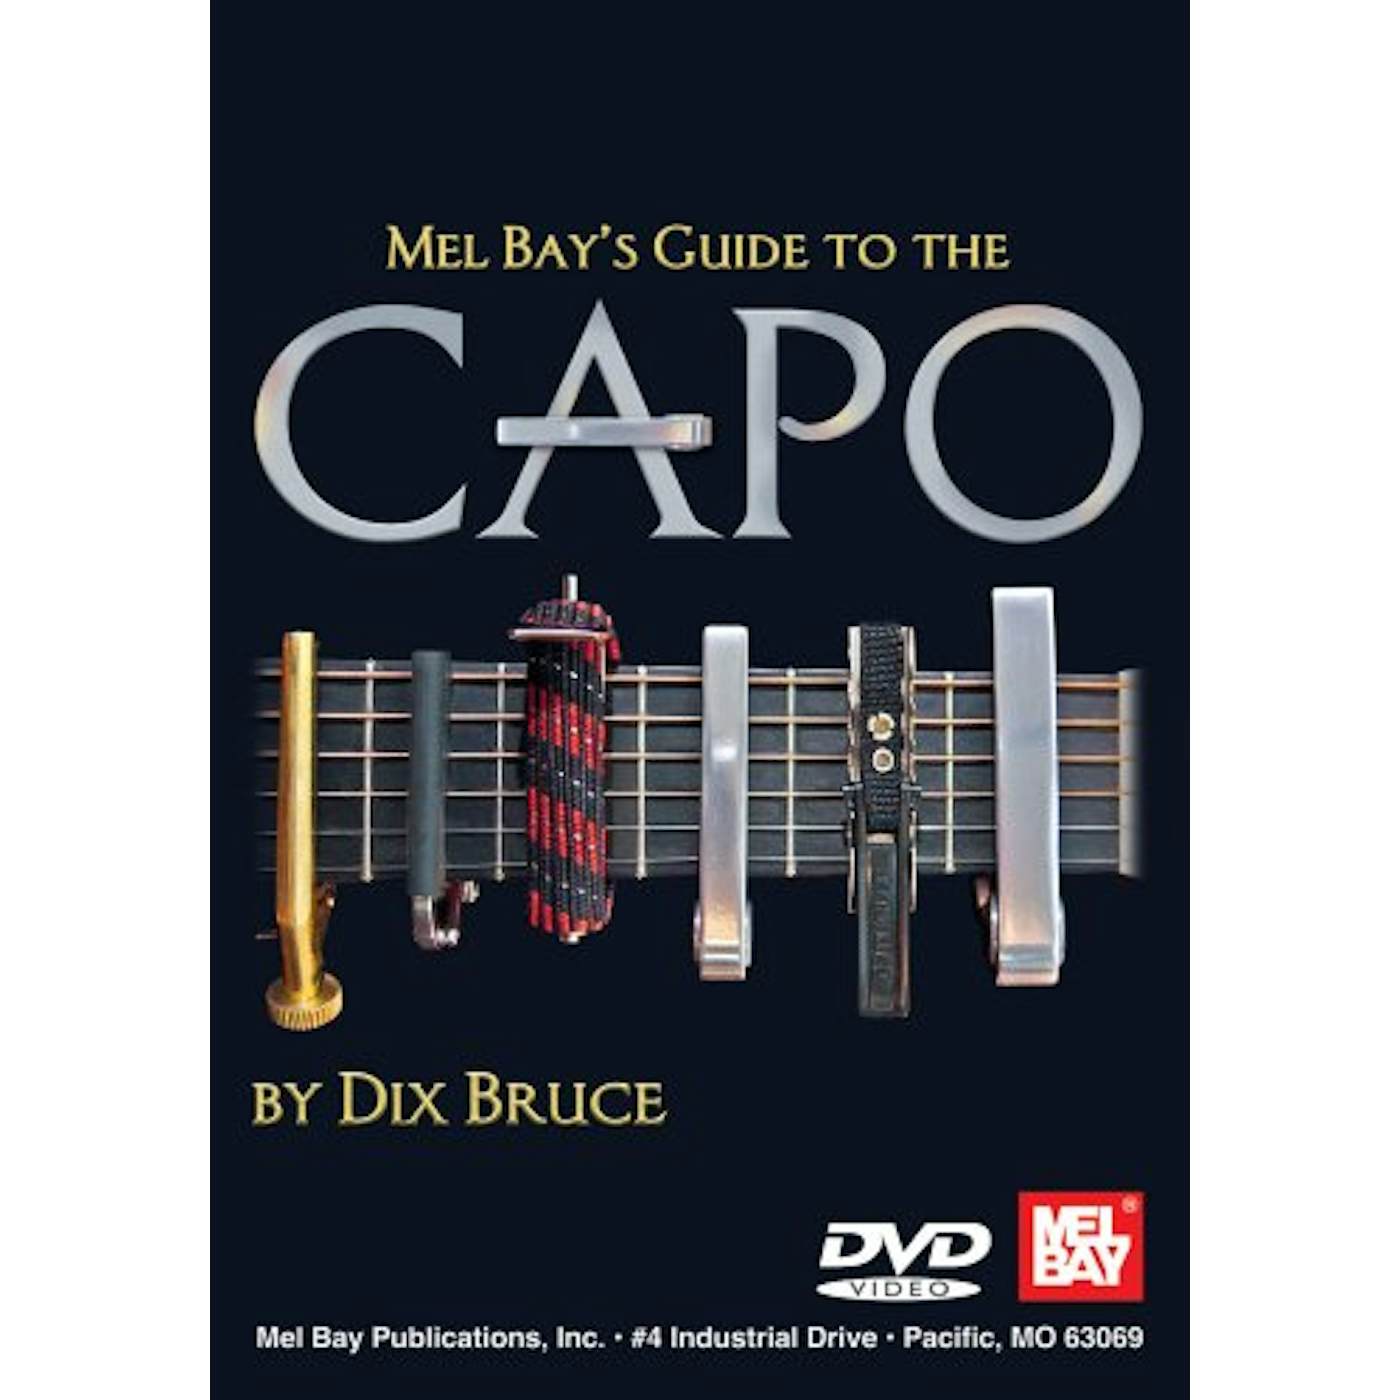 Dix Bruce GUIDE TO THE CAPO DVD